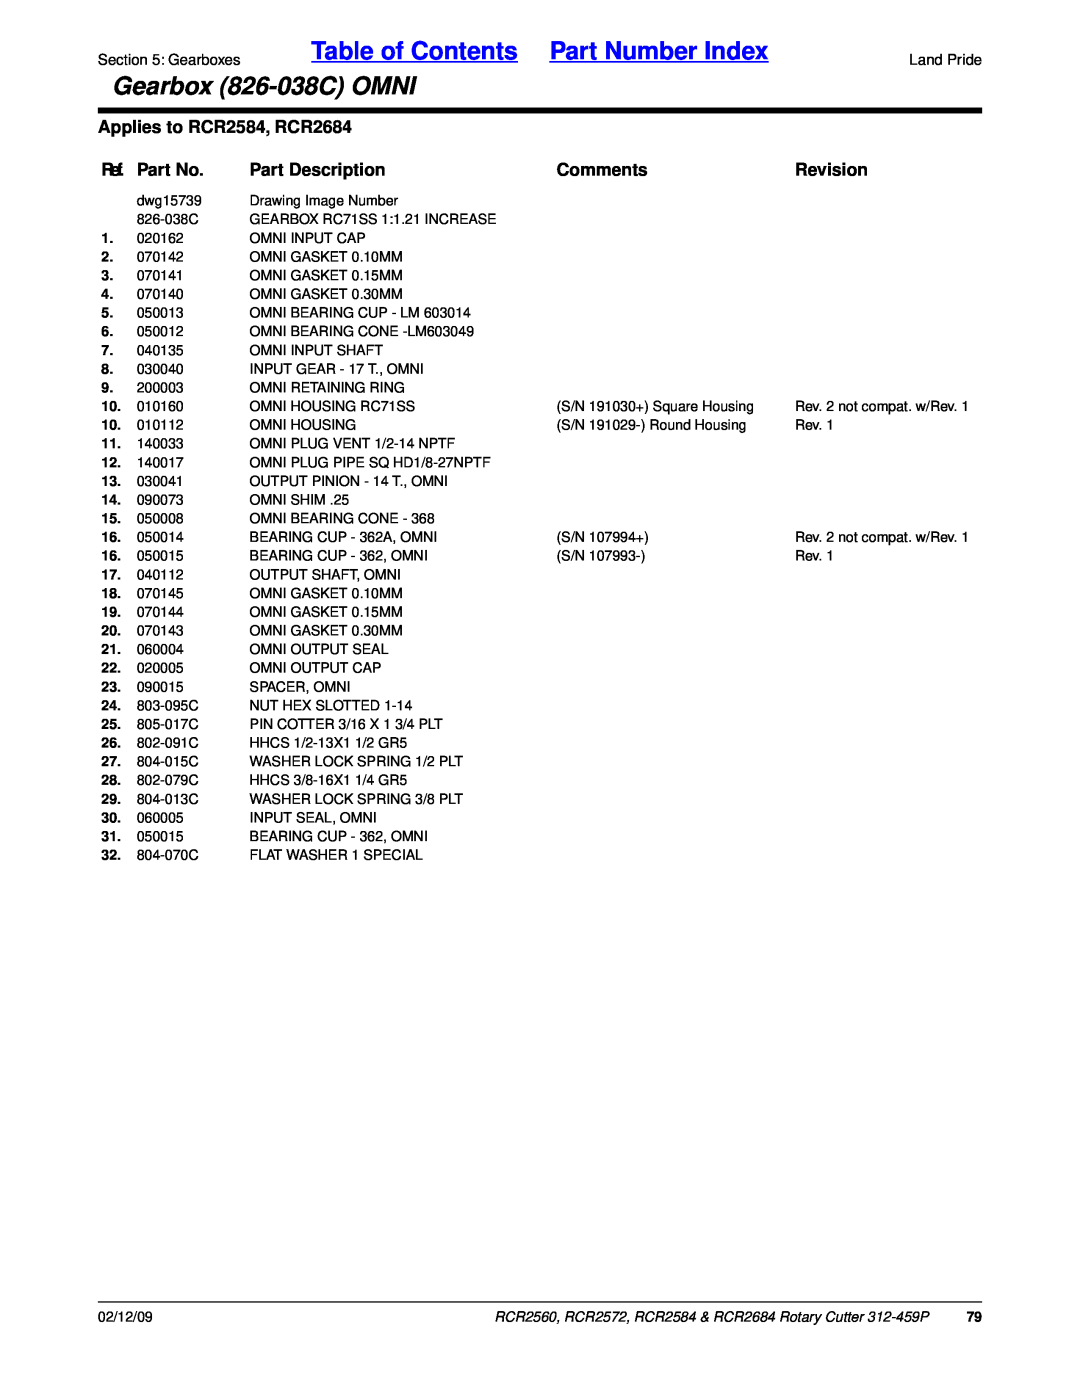 Land Pride RCR2560 Table of Contents Part Number Index, Gearbox 826-038COMNI, Applies to RCR2584, RCR2684, Ref. Part No 